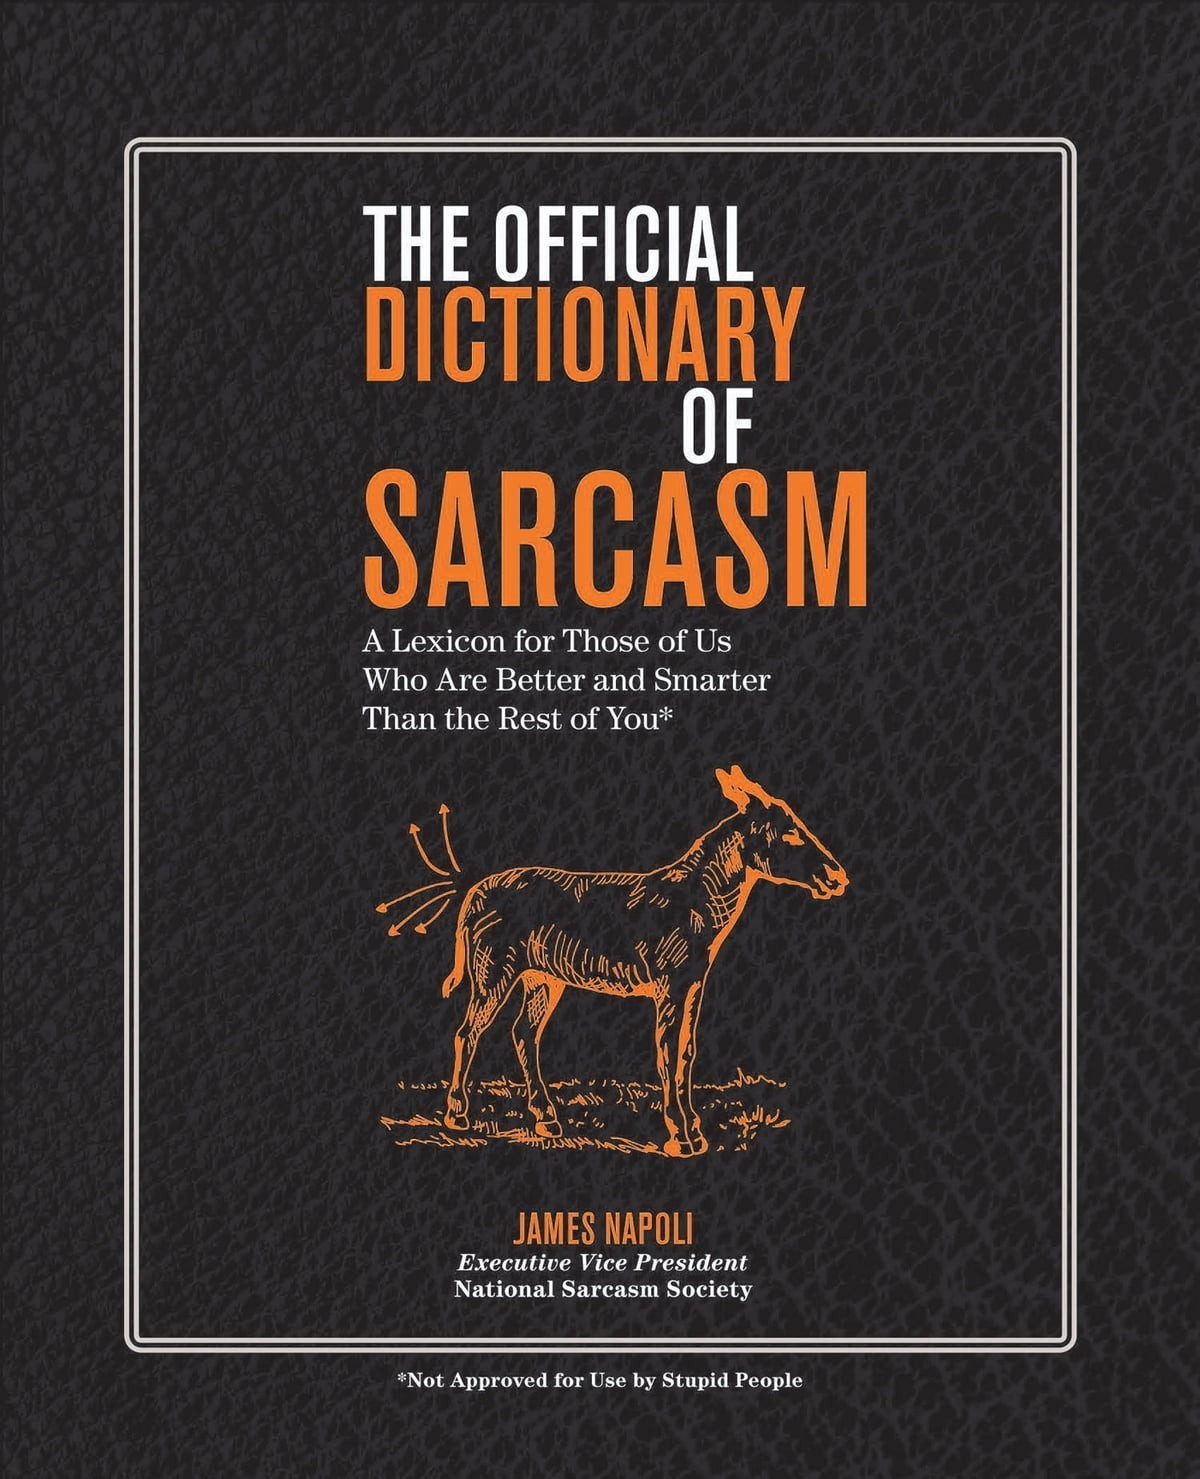 The Official Dictionary of Sarcasm Postcards: 45 Cards for Those of Us Who Are Better and Smarter Than the Rest of You